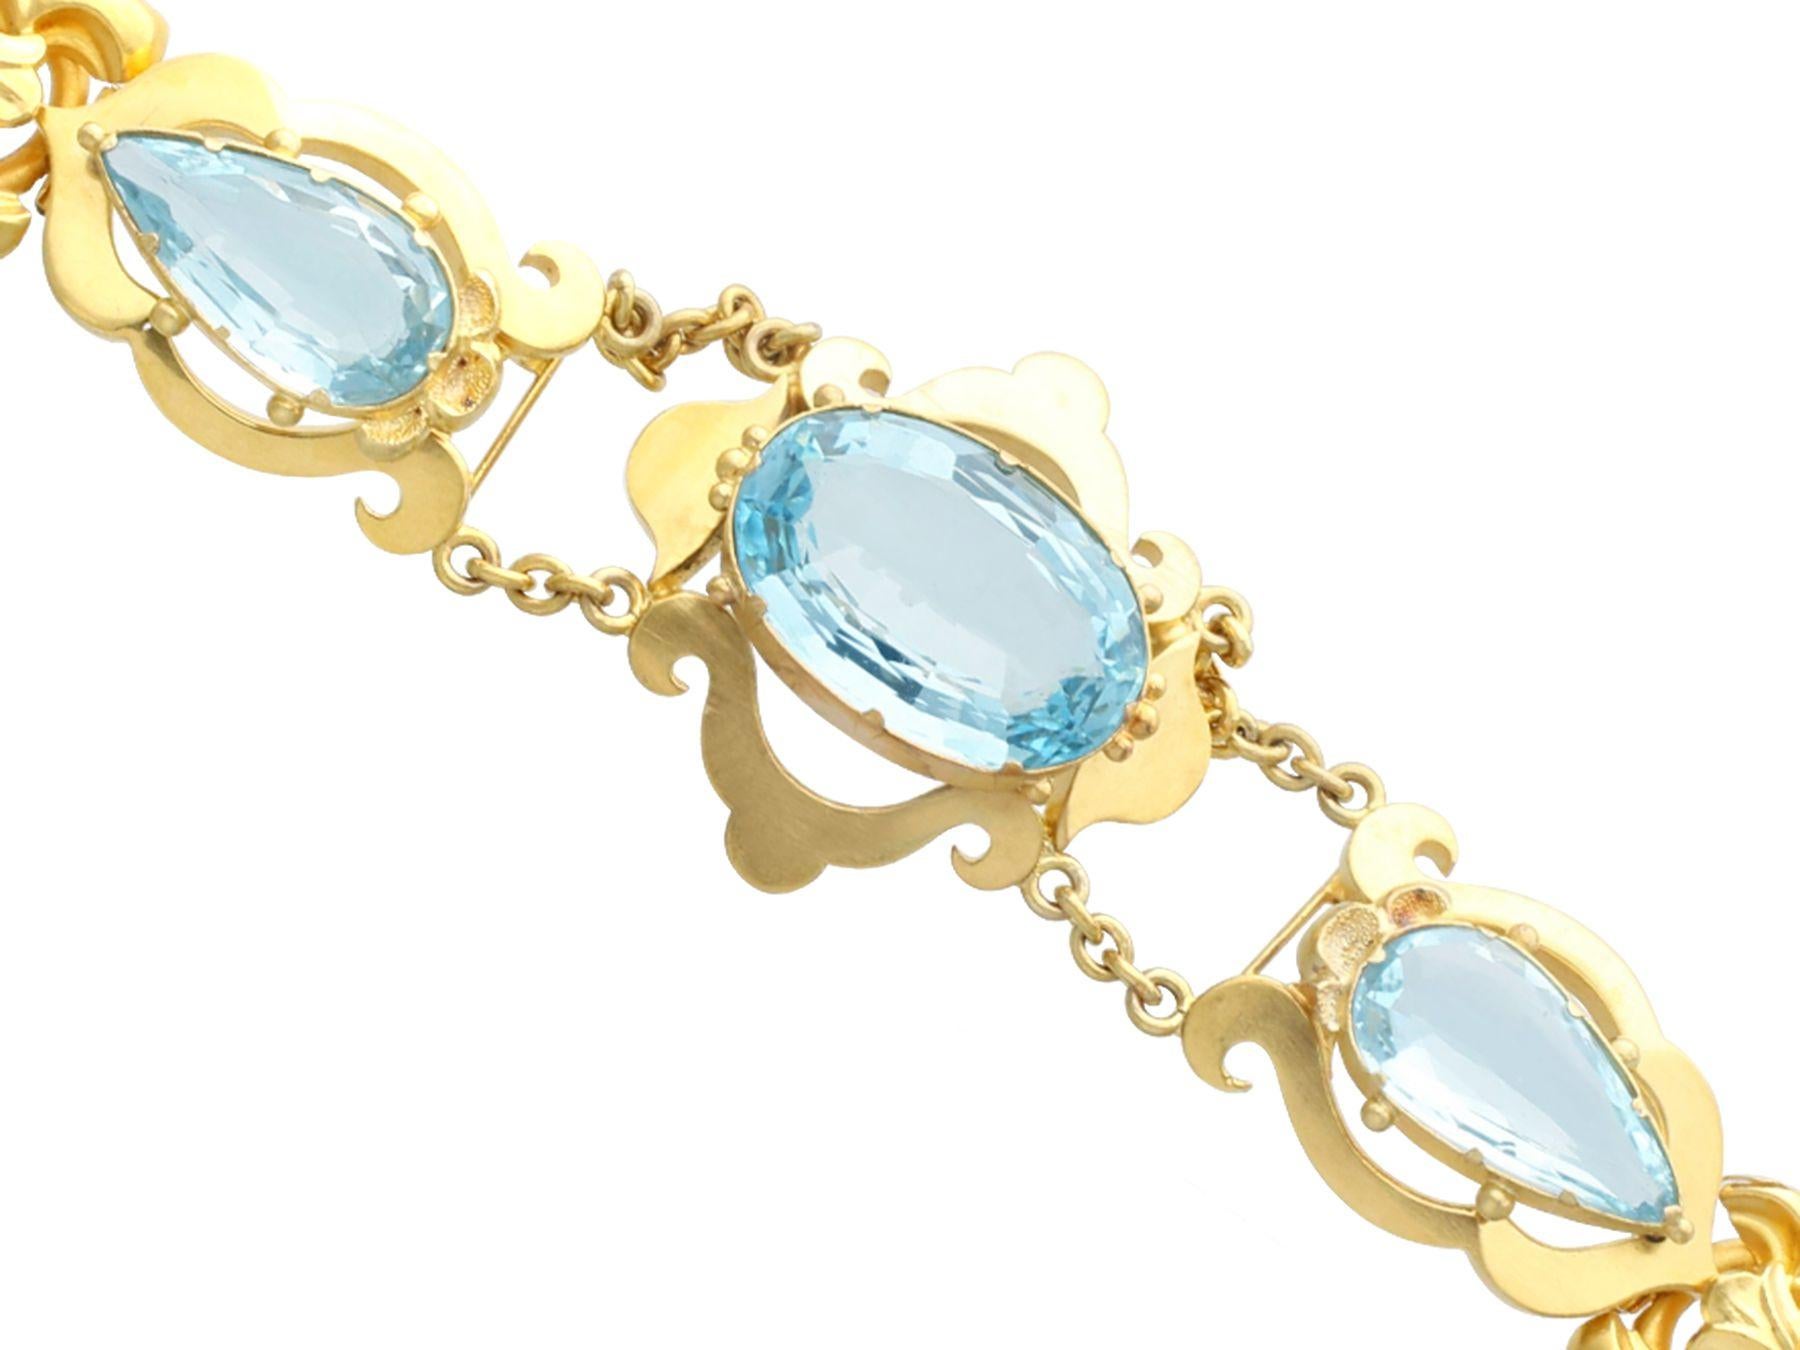 A stunning, fine and impressive antique 23.72 carat aquamarine, 21 karat and 12 karat yellow gold necklace; part of our diverse antique jewelry collections

This stunning, fine and impressive 19th century aquamarine necklace has been crafted in 21k